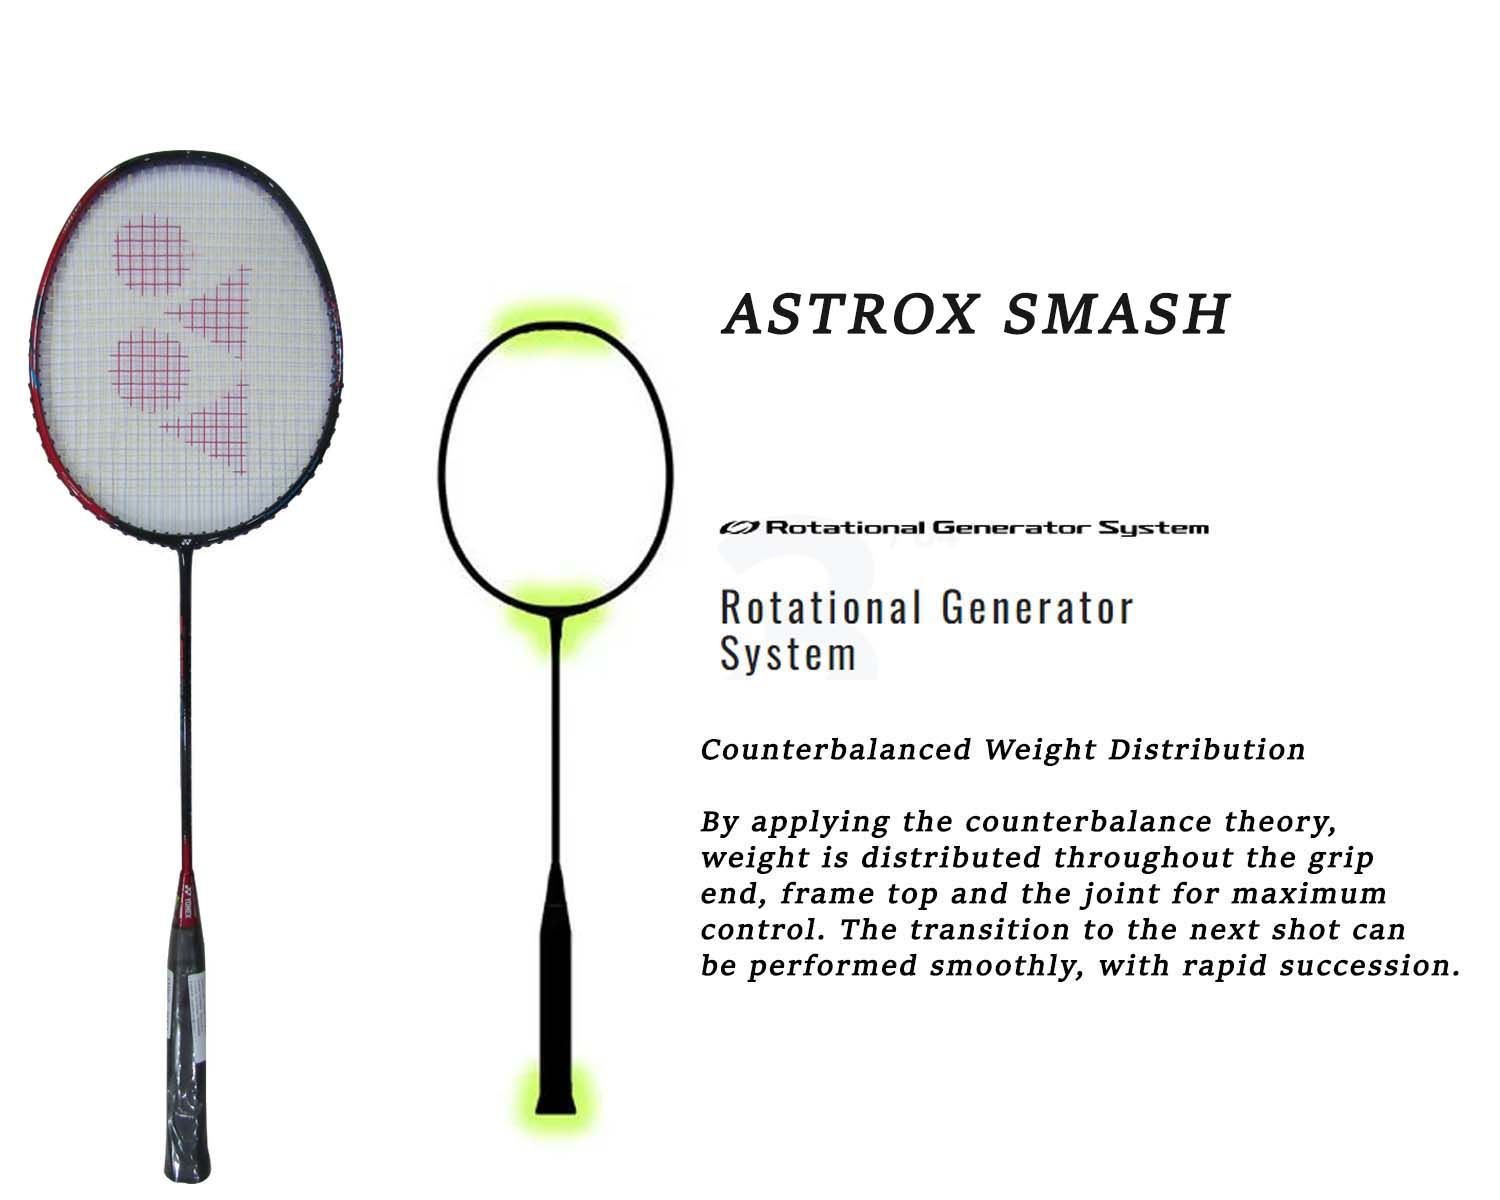 Buy Yonex Astrox Smash Badminton Racket Online at Lowest Prices in India